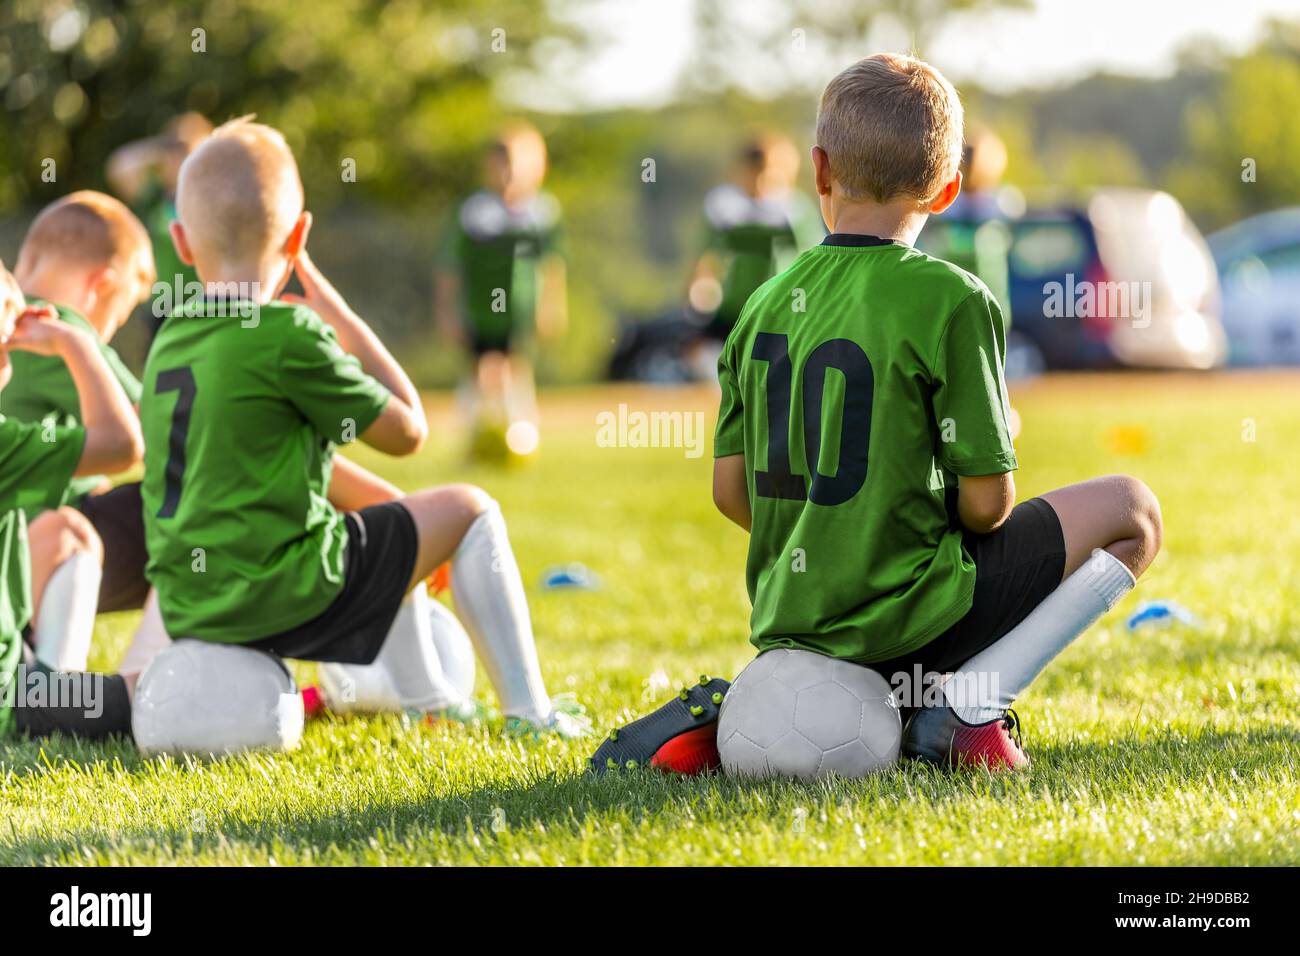 Group of Young Boys Kicking Sports Soccer Game on Grass Pitch. Boys Sitting on Soccer Balls Waiting to Play the Game. Friends in Sports Team. School B Stock Photo